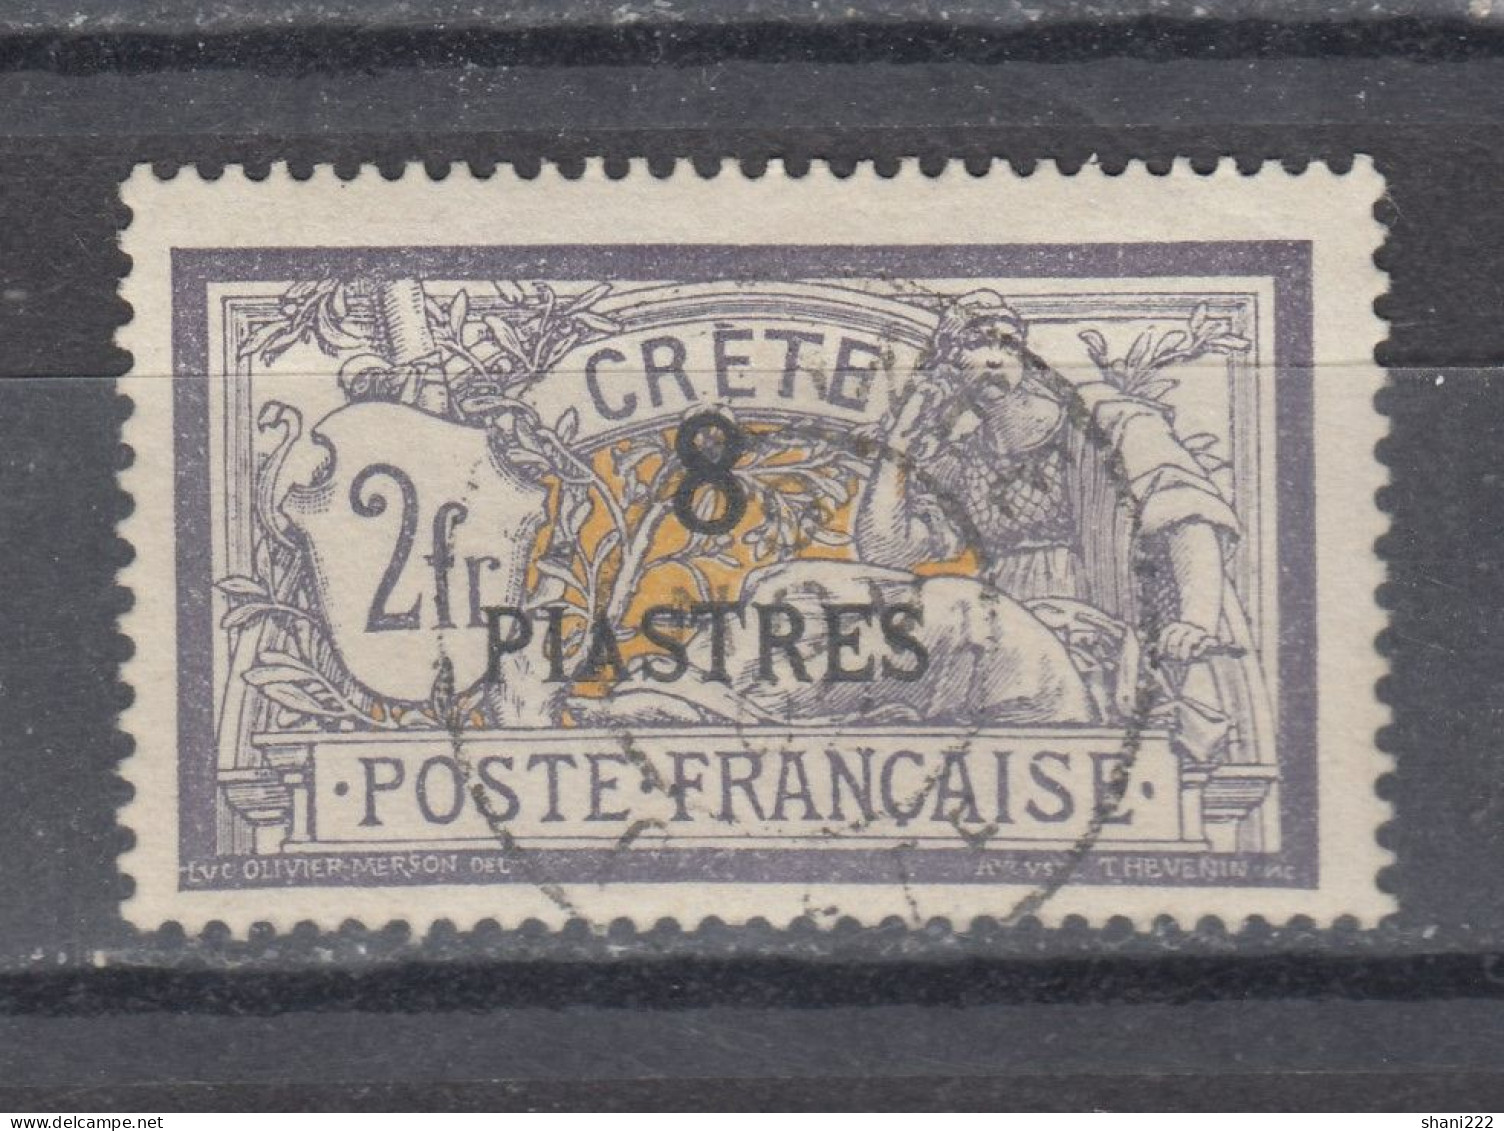 Crete 1903 - 8 Pt. Surcharge On 2 Fr. - Used (e-570) - Used Stamps